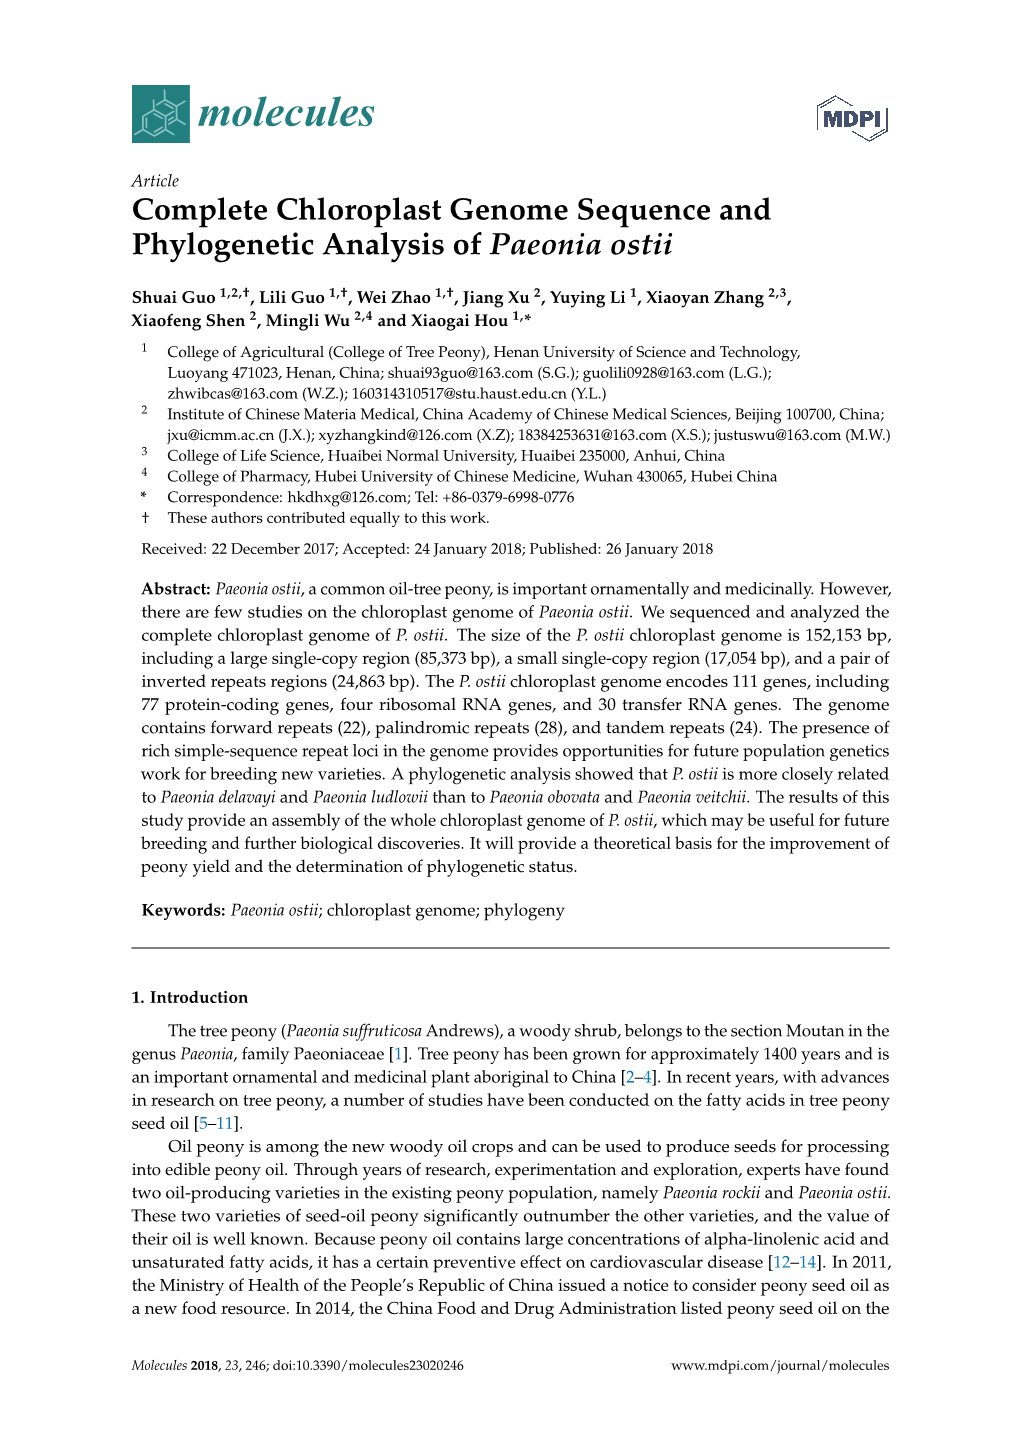 Complete Chloroplast Genome Sequence and Phylogenetic Analysis of Paeonia Ostii